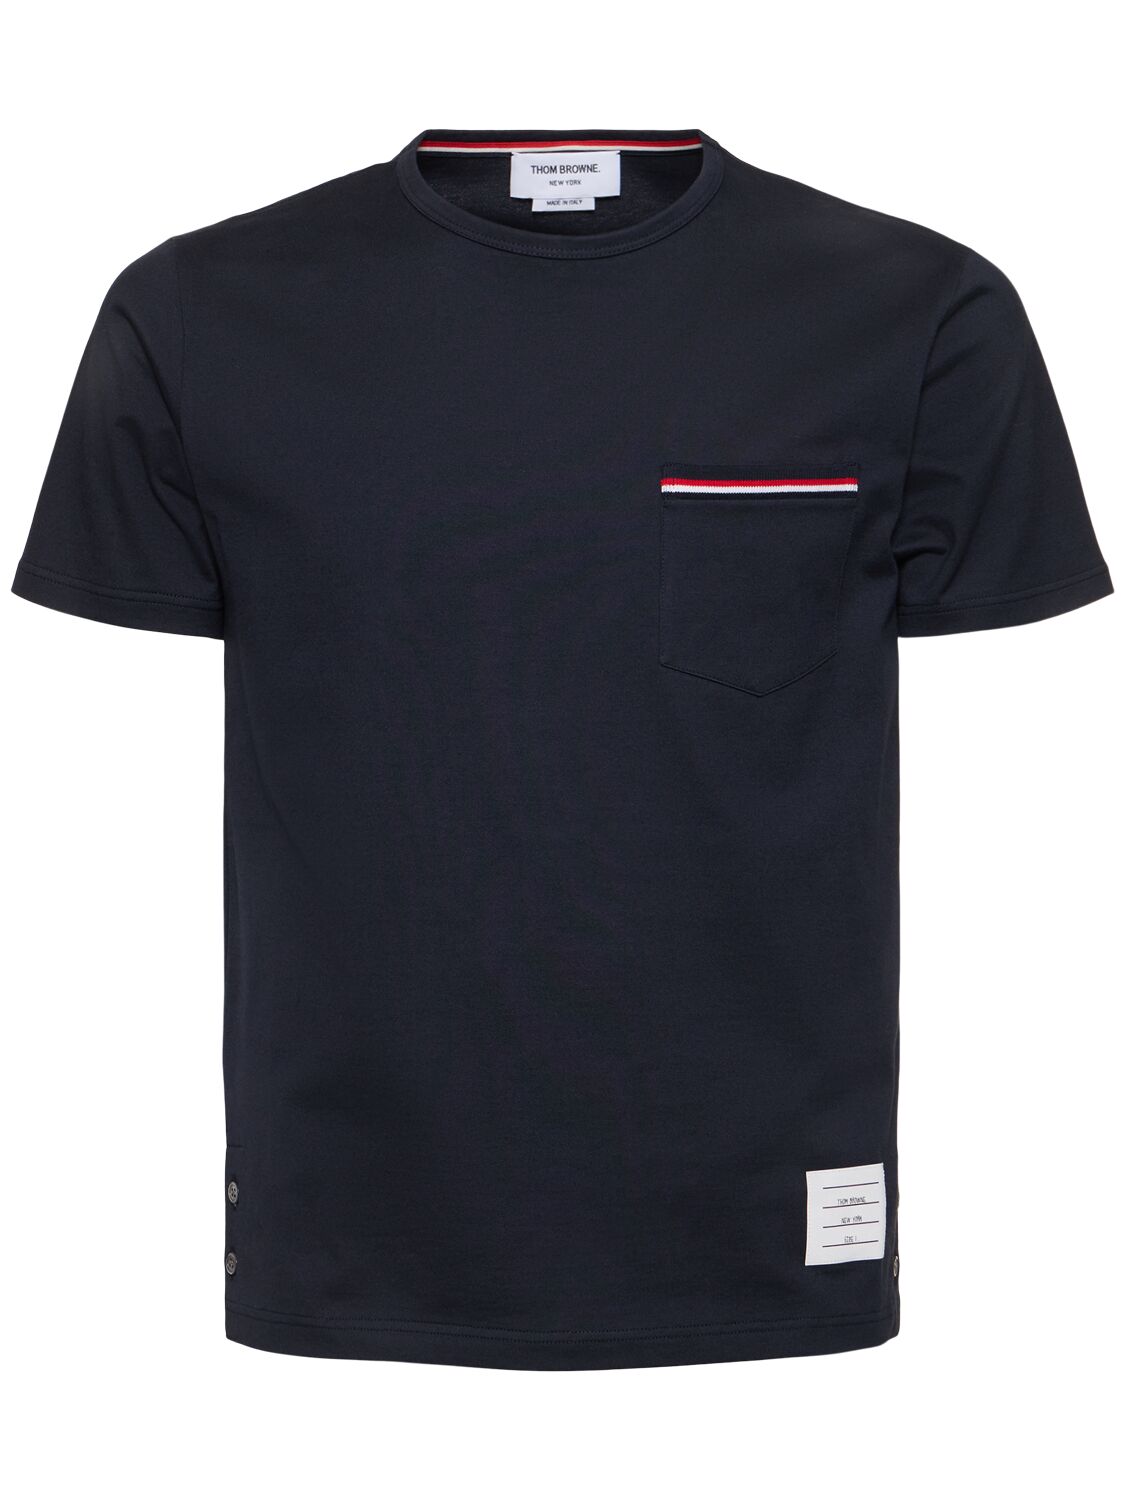 Thom Browne Cotton Jersey T-shirt W/ Pocket In 네이비